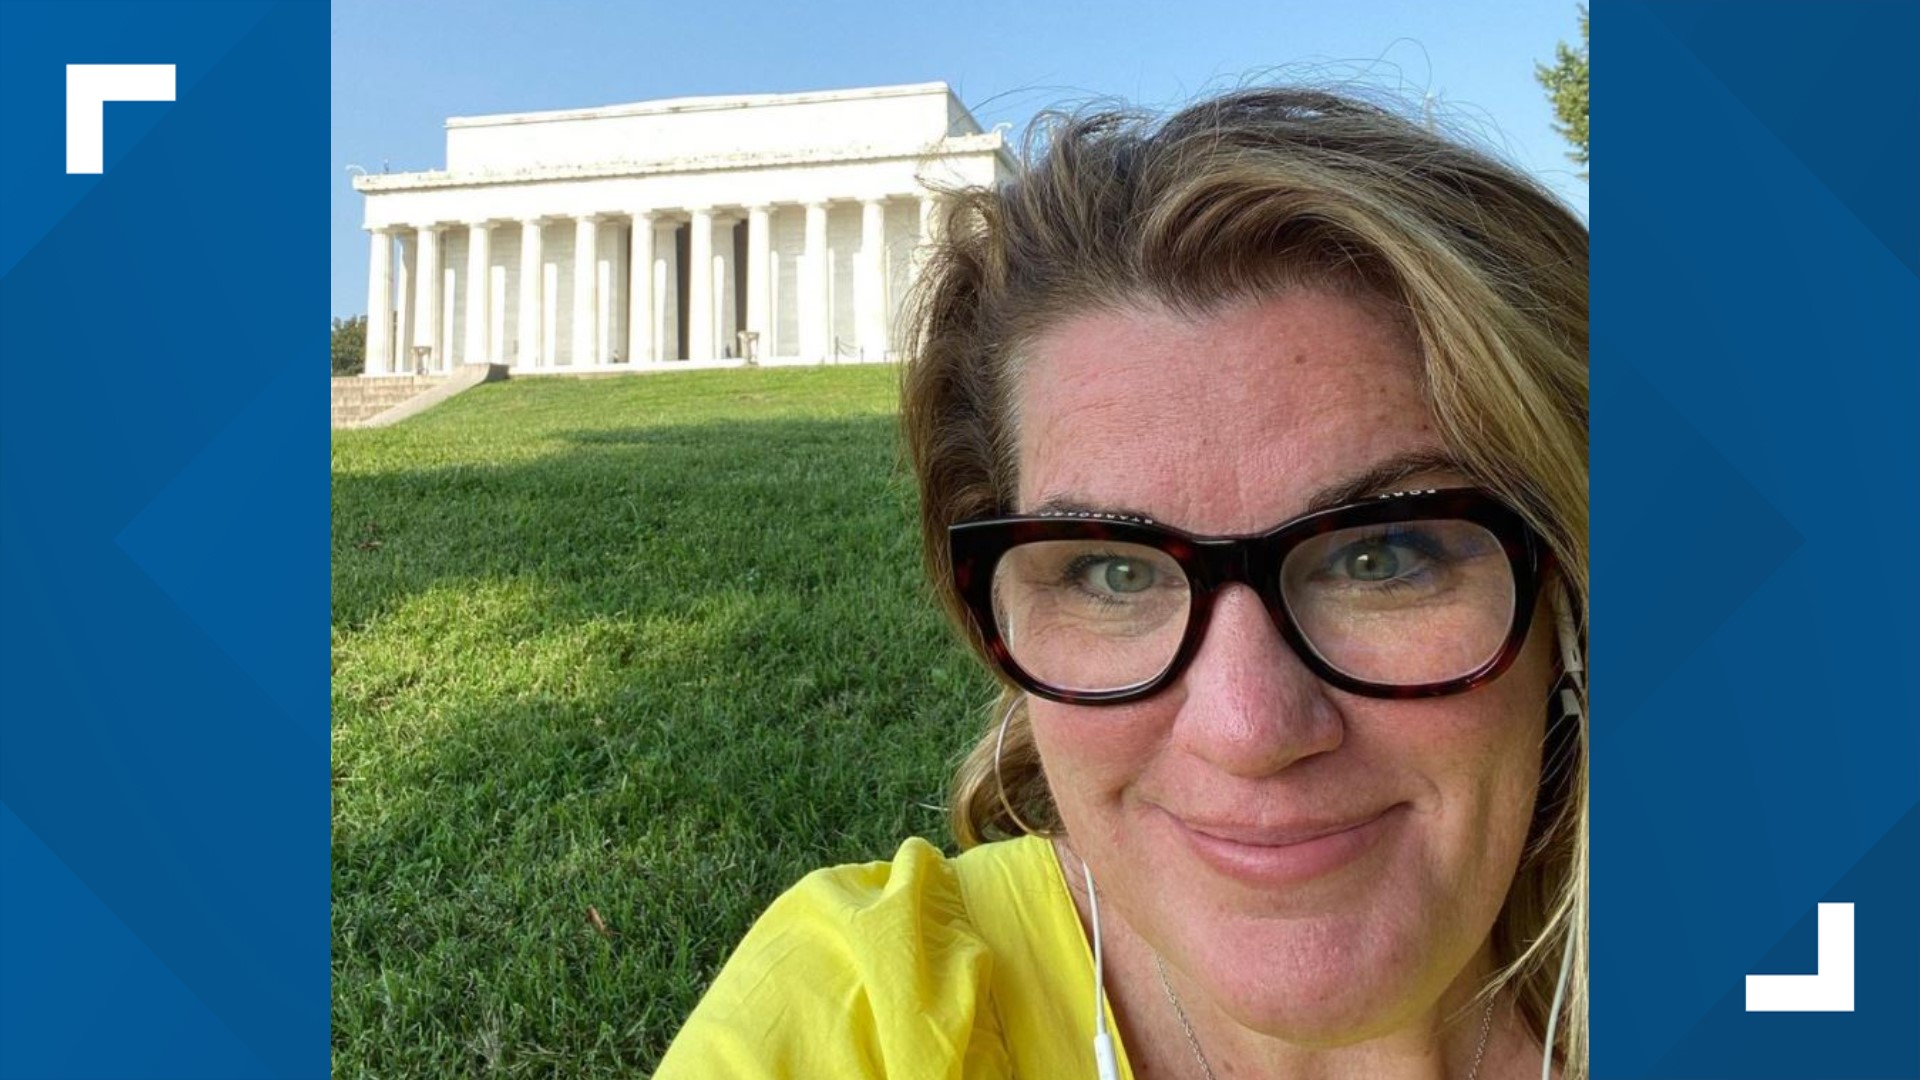 Westlake High School U.S. history teacher Cathy Cluck spent 15 days last year teaching remotely from places like Jamestown, Gettysburg, and Washington D.C.